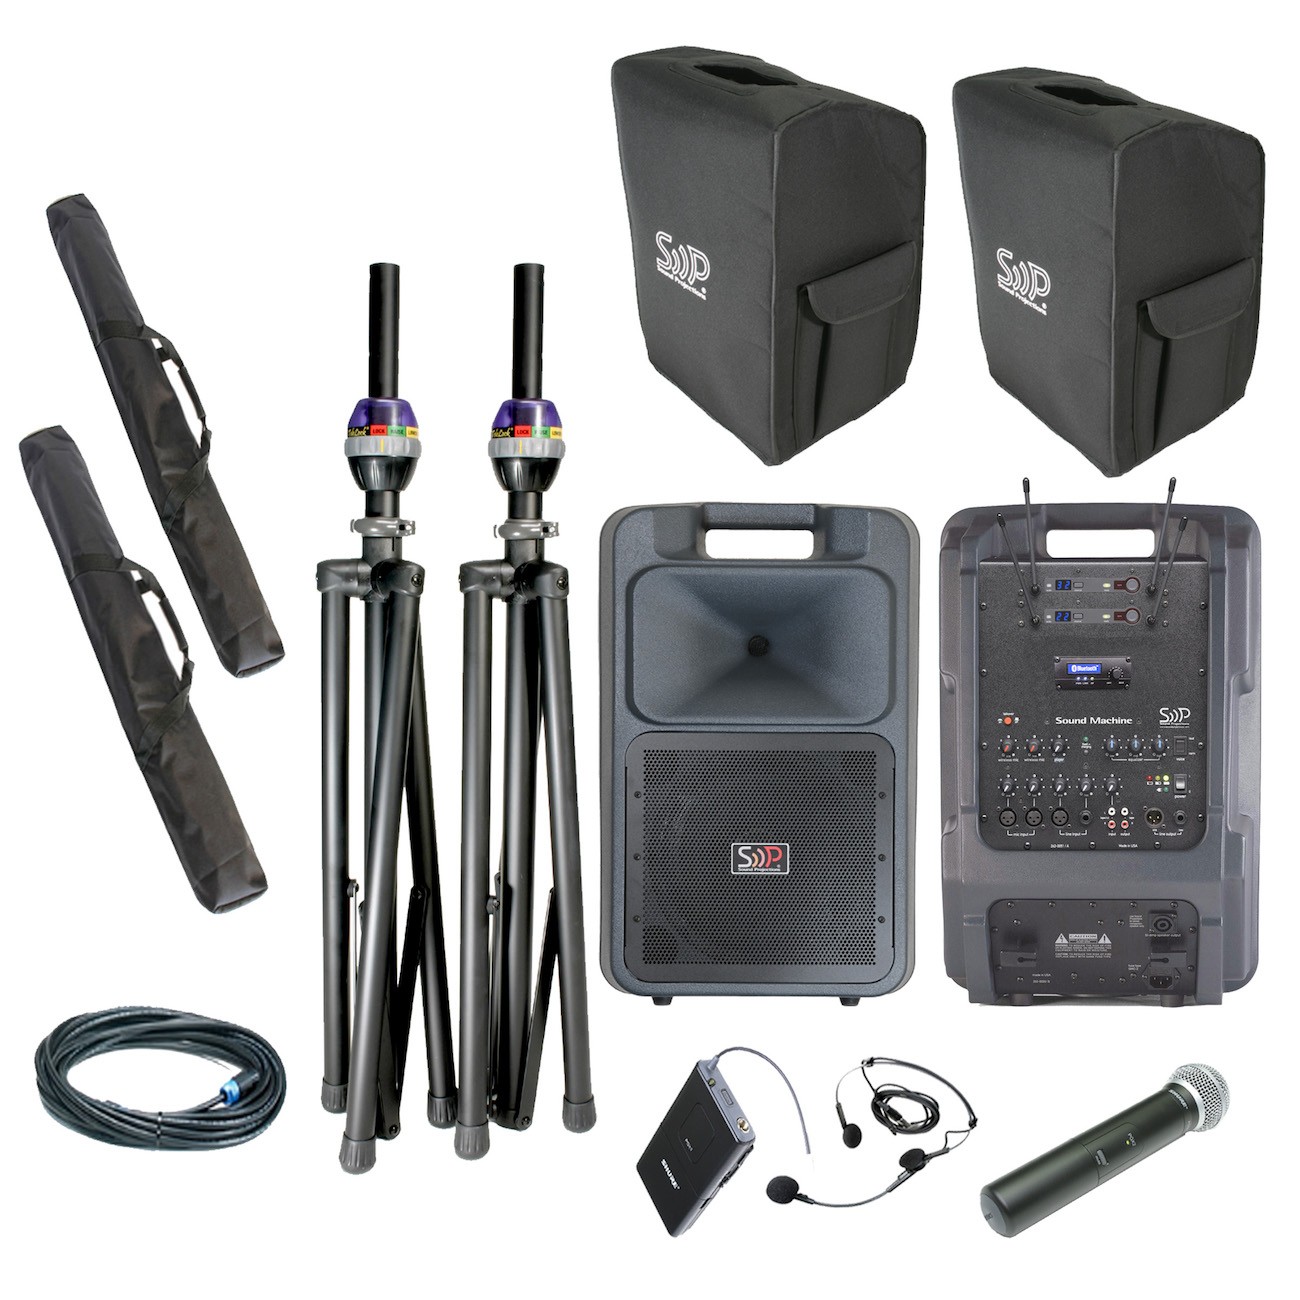 Sound Projections SM-5 Deluxe 60ch Digital Headset & Handheld Wireless OPT-600 w/Comp Speaker